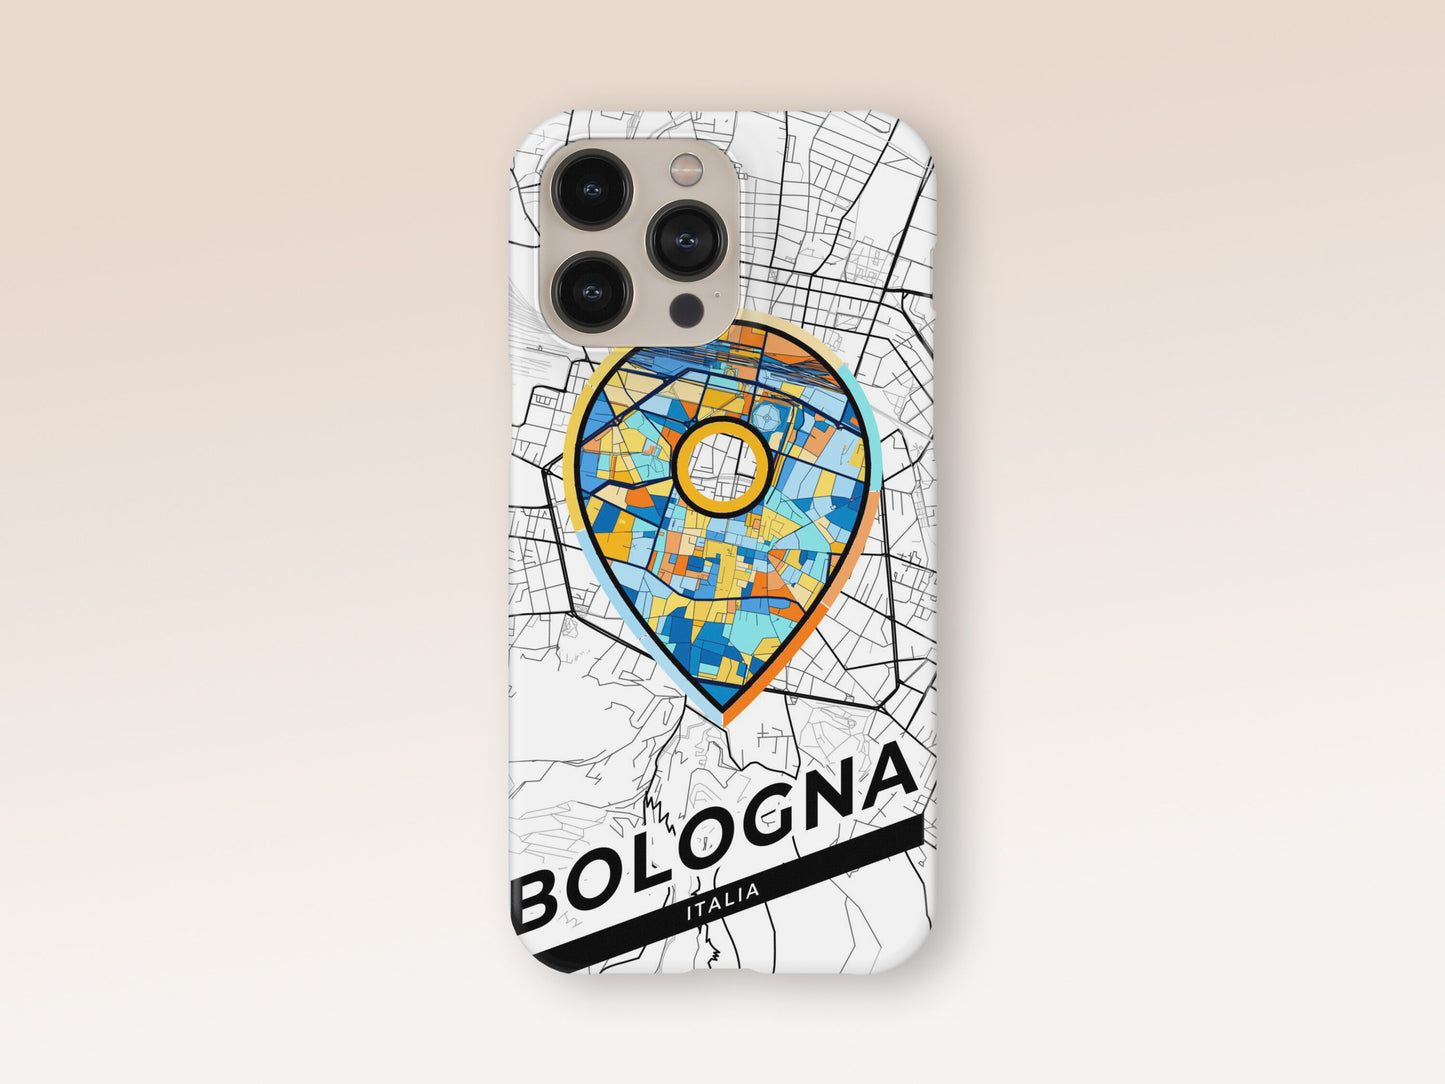 Bologna Italy slim phone case with colorful icon. Birthday, wedding or housewarming gift. Couple match cases. 1